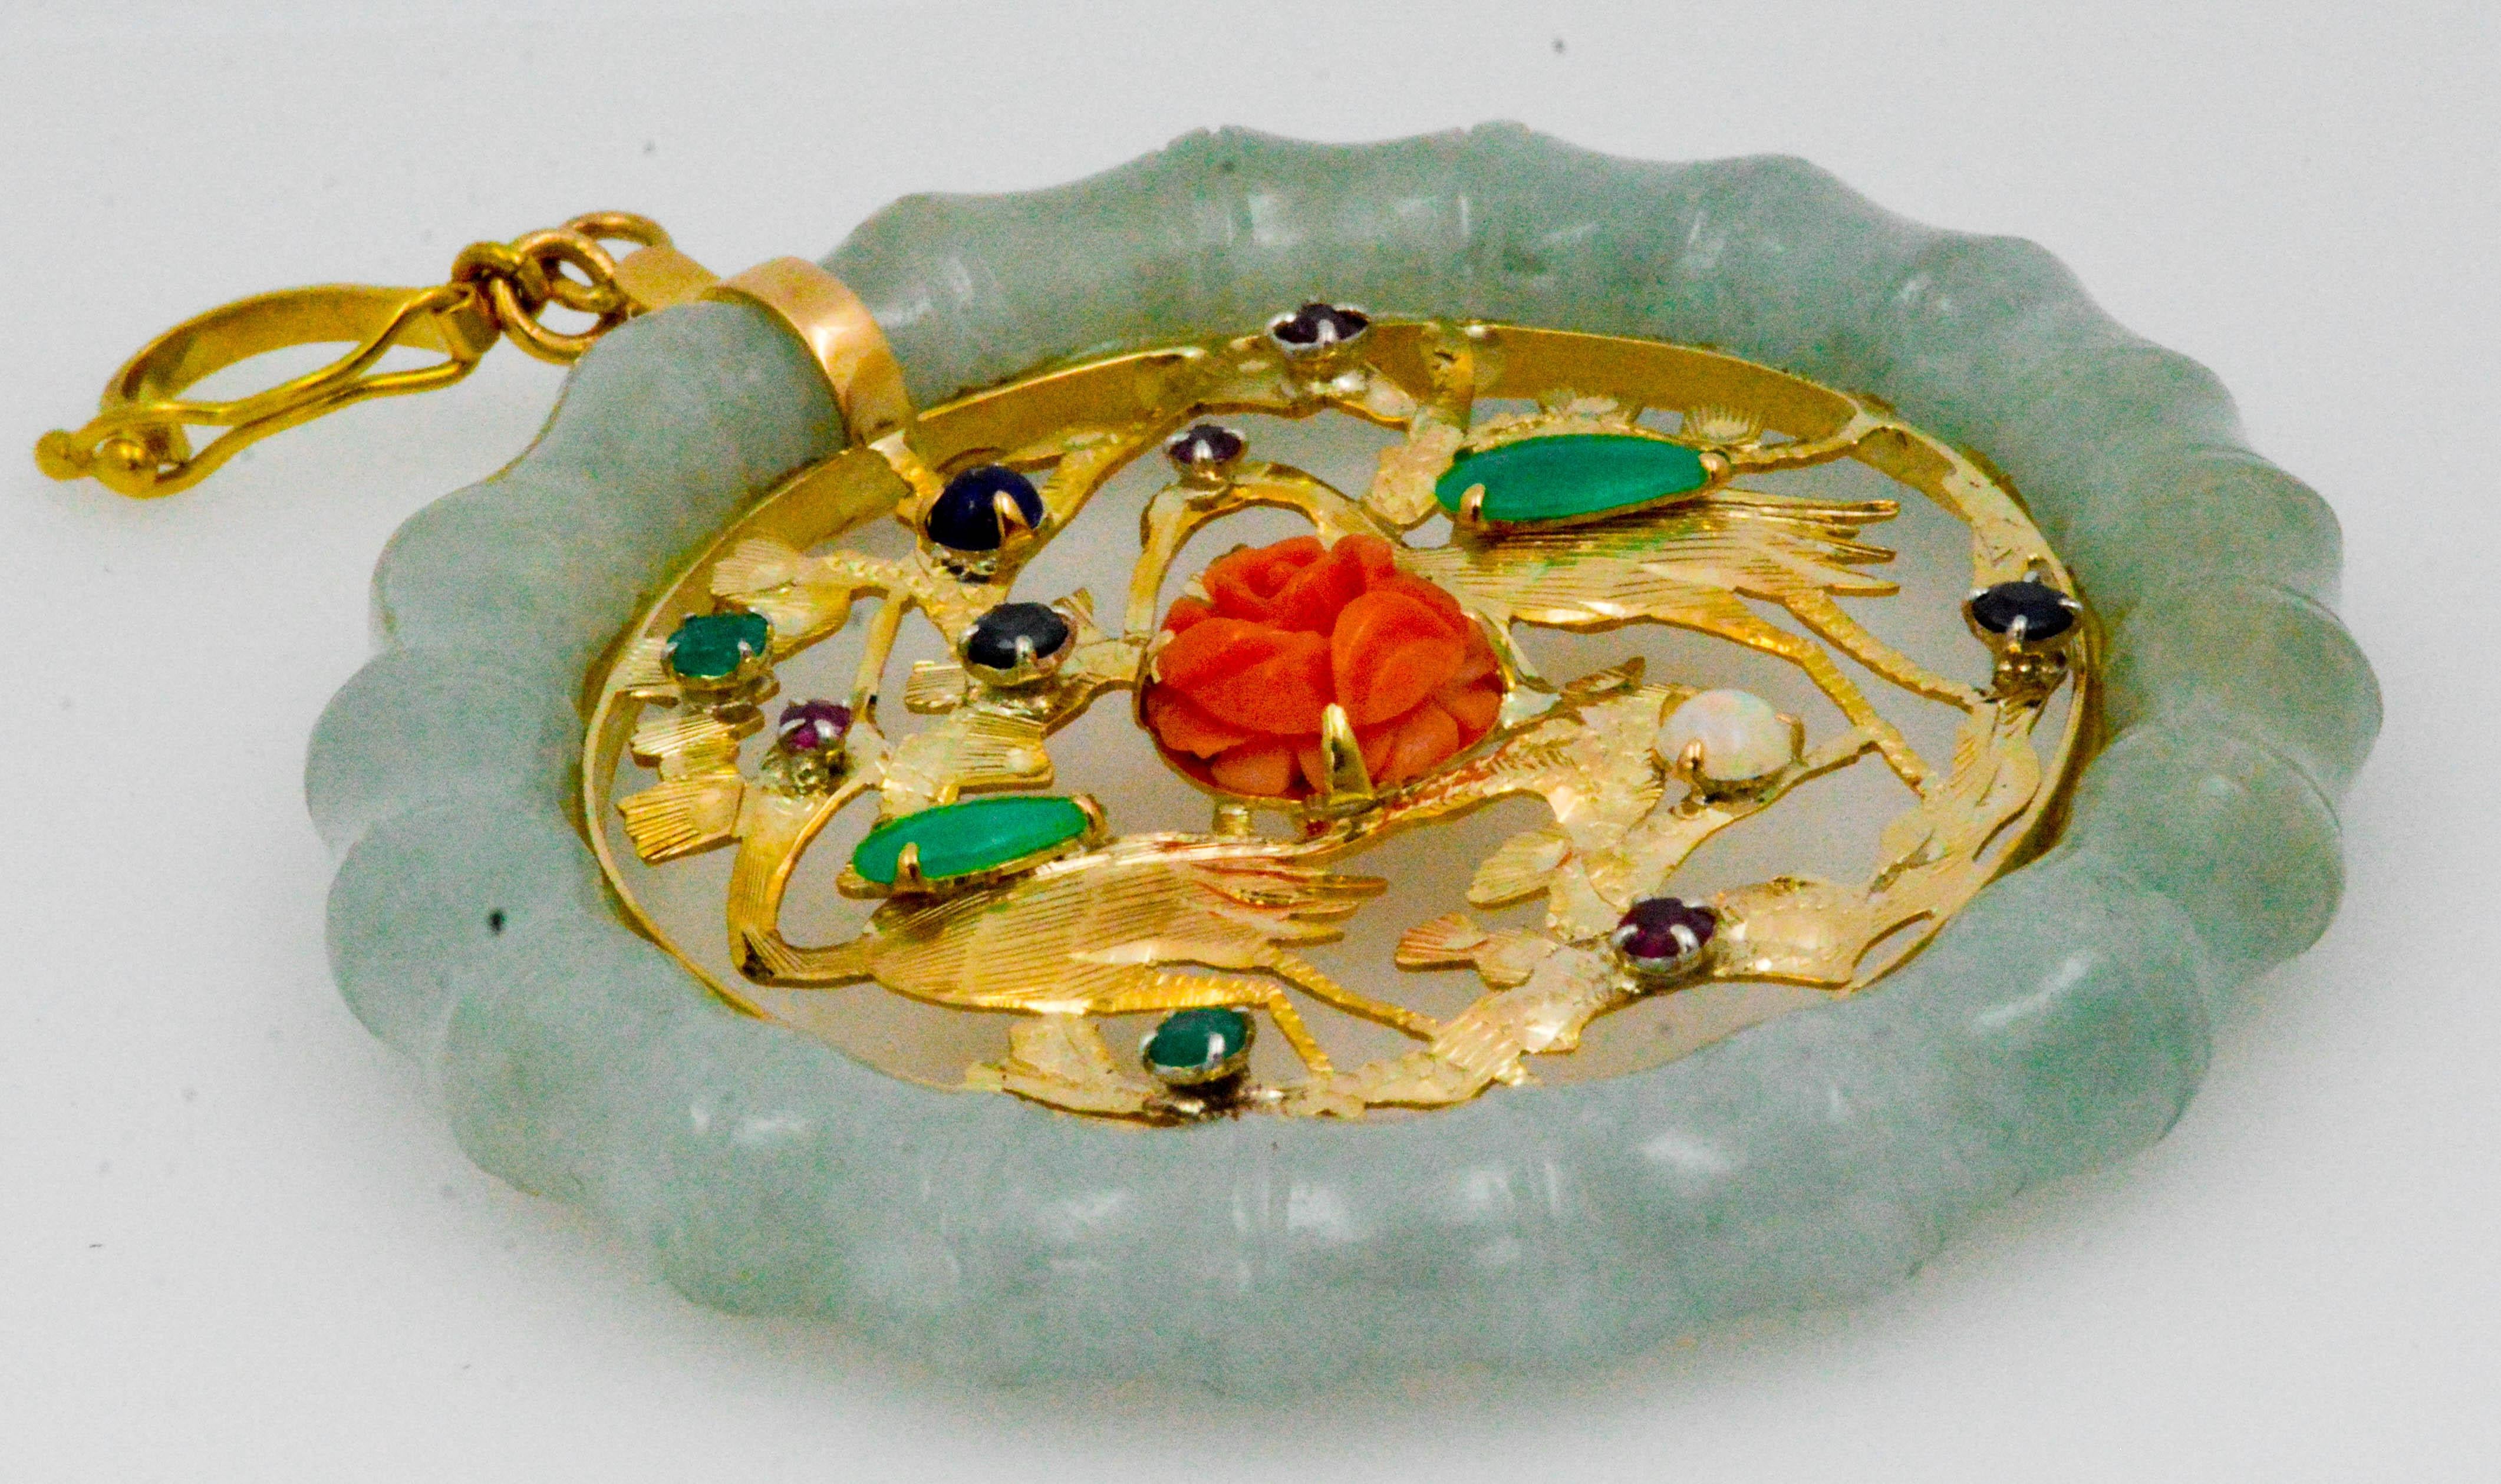 An expertly carved rosette coral (7.84 mm) is the centerpiece of this interesting Nephrite Jade pendant. With two carved 14 karat yellow gold cranes set with teardrop shape jade bodies and either ruby or emerald eyes. Adorning the intricately carved